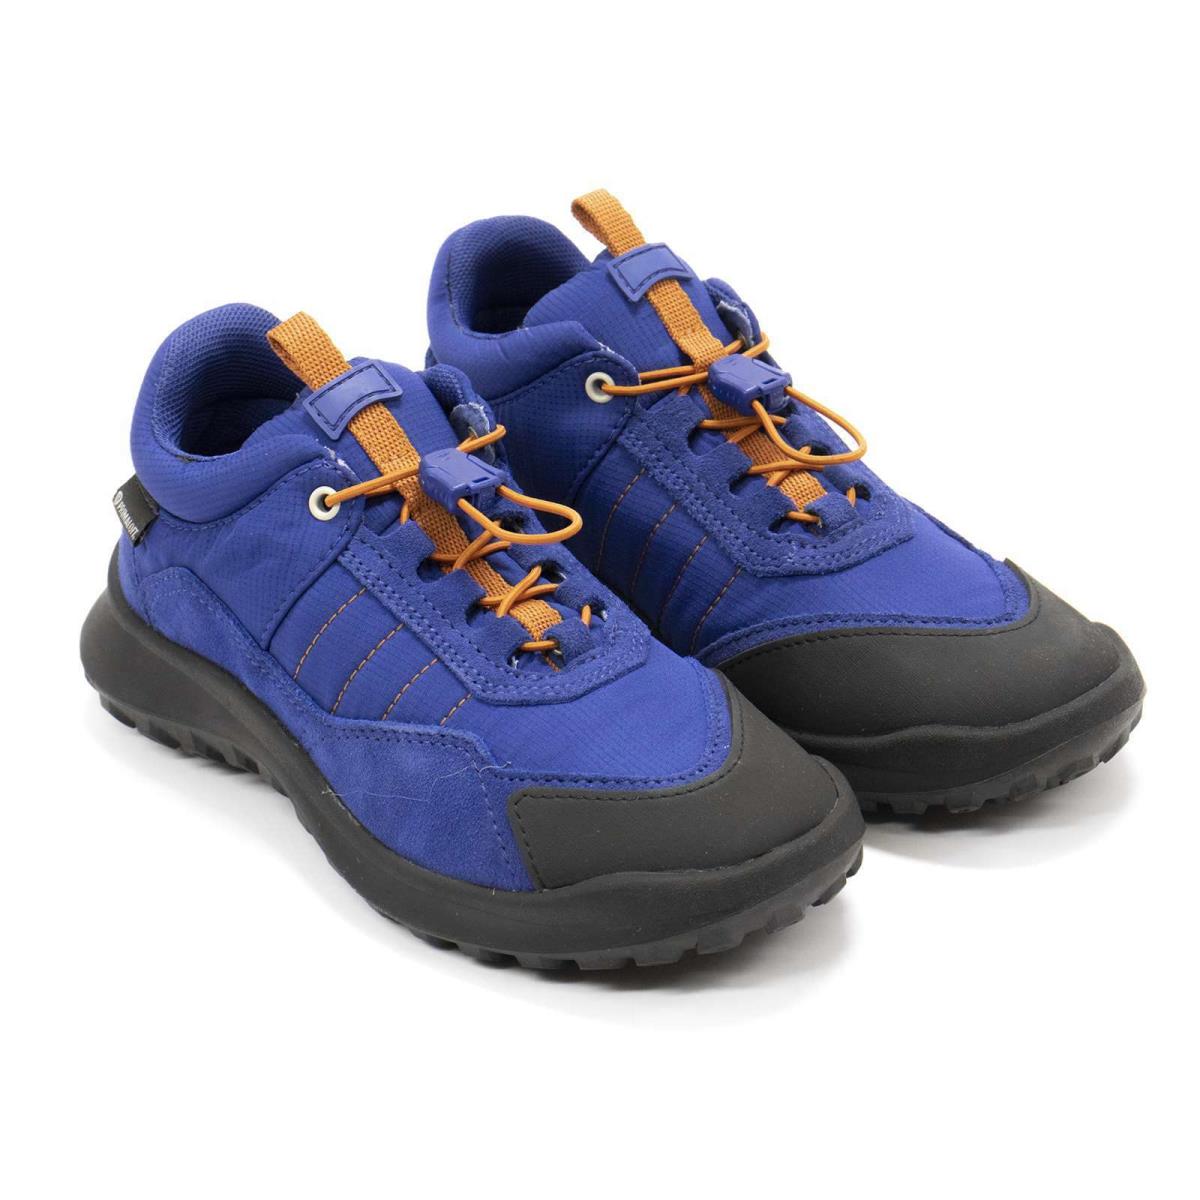 Kids Camper Crclr Mid-top Insulated Water-resistant Sneakers Blue Boots Blue